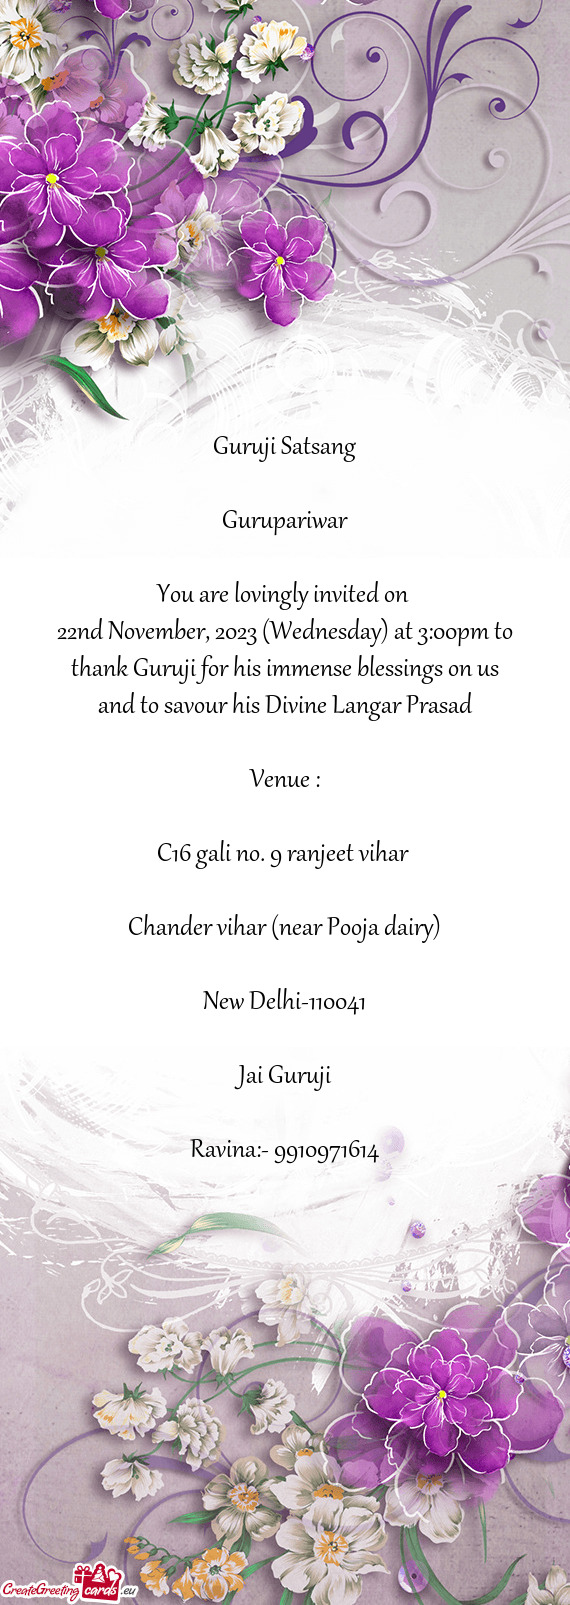 22nd November, 2023 (Wednesday) at 3:00pm to thank Guruji for his immense blessings on us